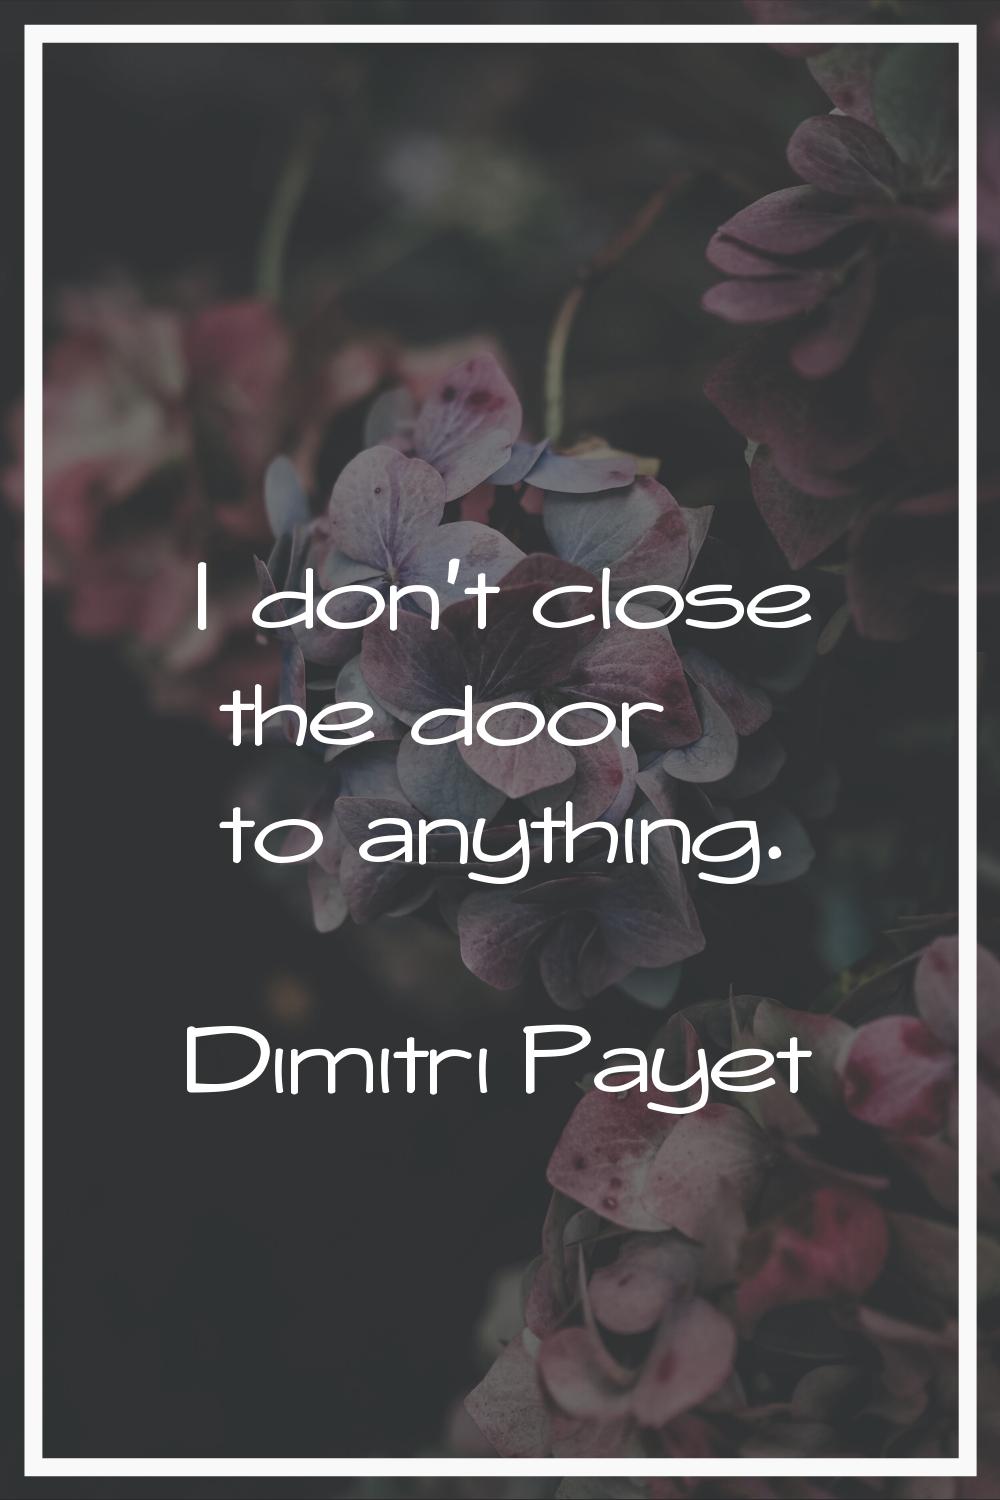 I don't close the door to anything.